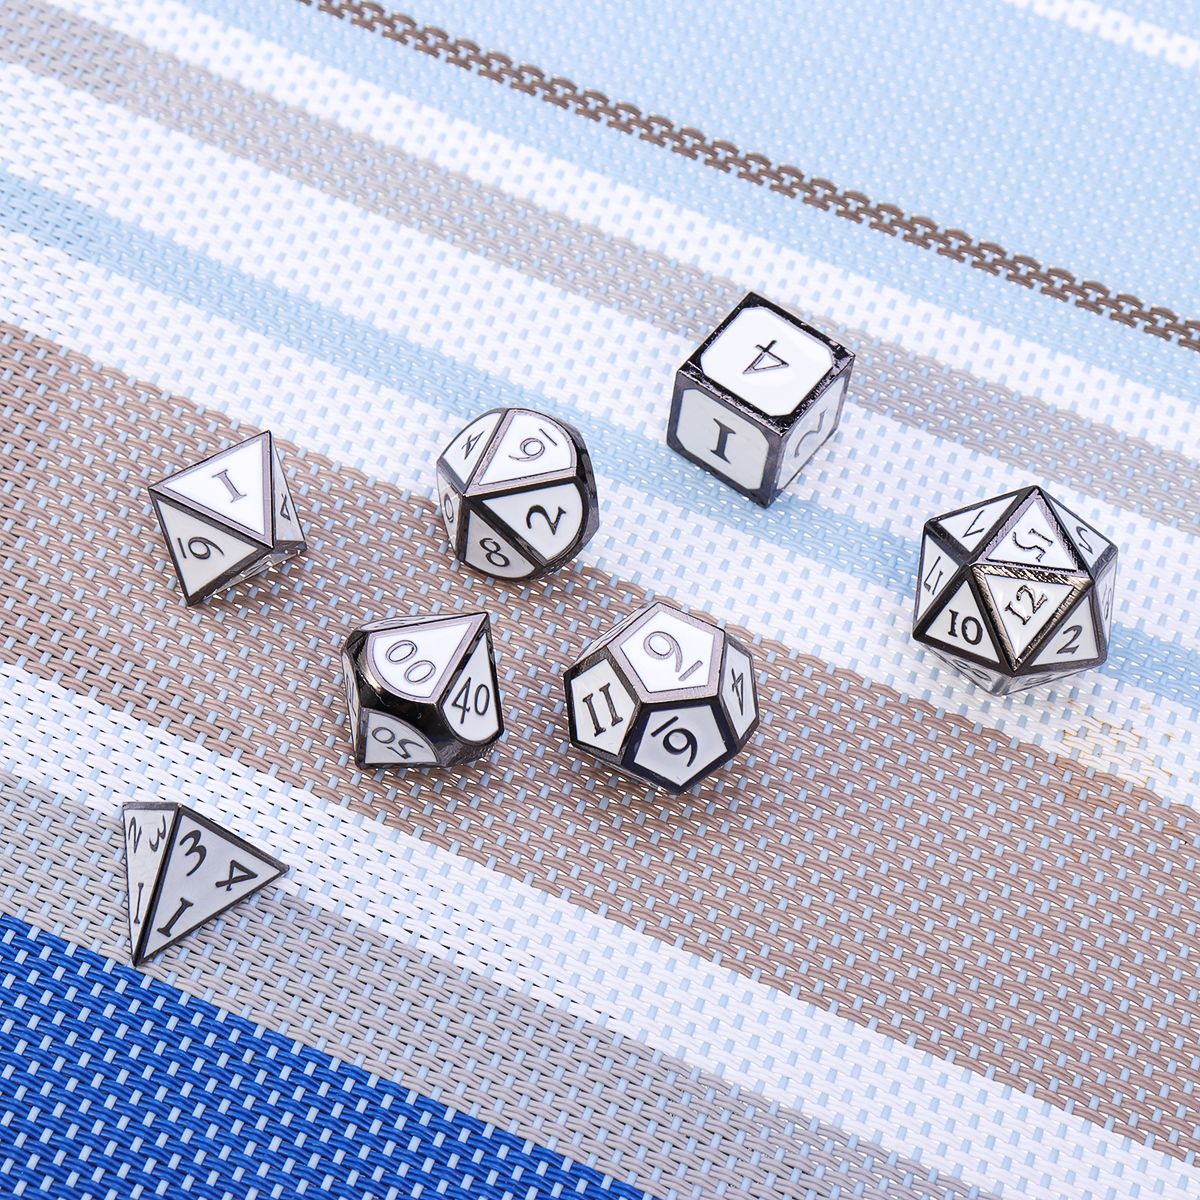 7Pcs-Zinc-Alloy-Enamel-Dices-Set-Polyhedral-Solid-Metal-Dice-Role-Playing-Game-Dice-Gadget-RPG-1374946